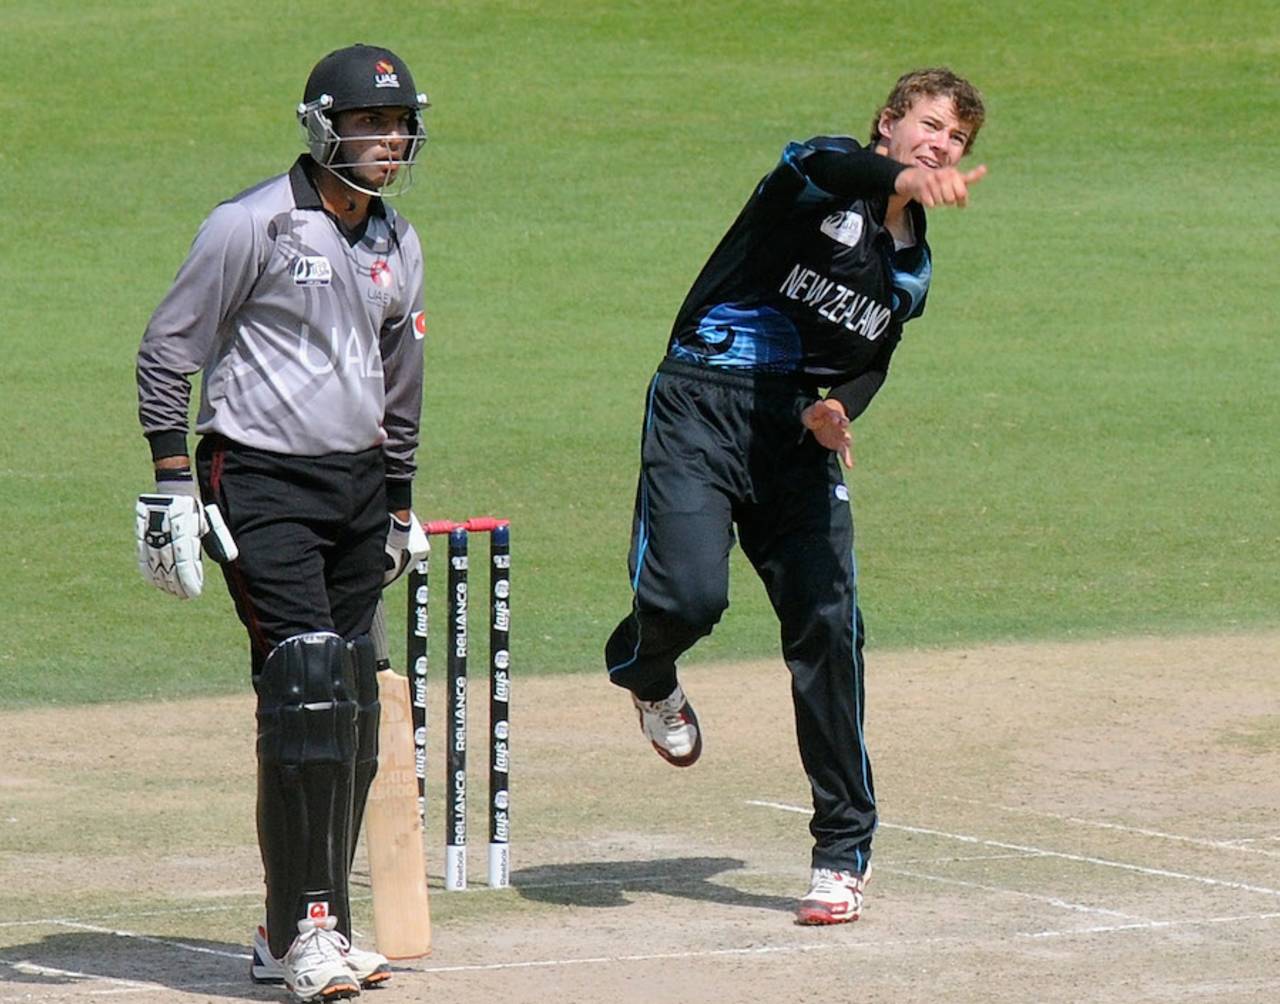 Josh Finnie will lead New Zealand in his second appearance at the Under-19 World Cup&nbsp;&nbsp;&bull;&nbsp;&nbsp;ICC